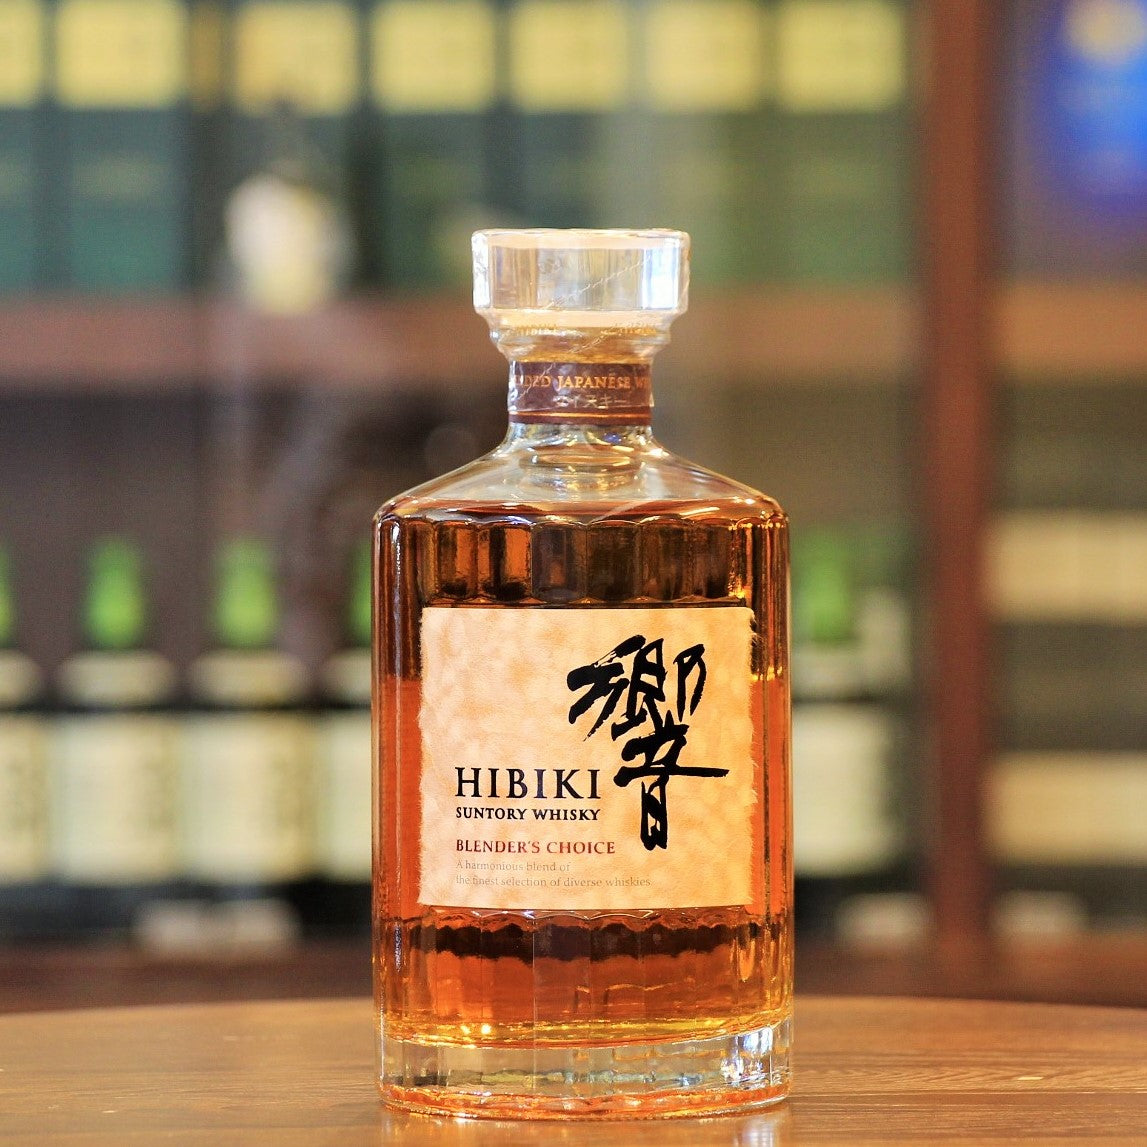 Released around September 2018, soon after the Hibiki 17 was discontinued, this is rumoured to/believed to be the 'replacement". A harmonious blend of Japanese malt and grain whiskies from Yamazaki, Hakushu and Chita presented in the traditional Hibiki 24 faceted bottle and aged between 12 and 30 years with an average age of around 15 years. No Box is Available.